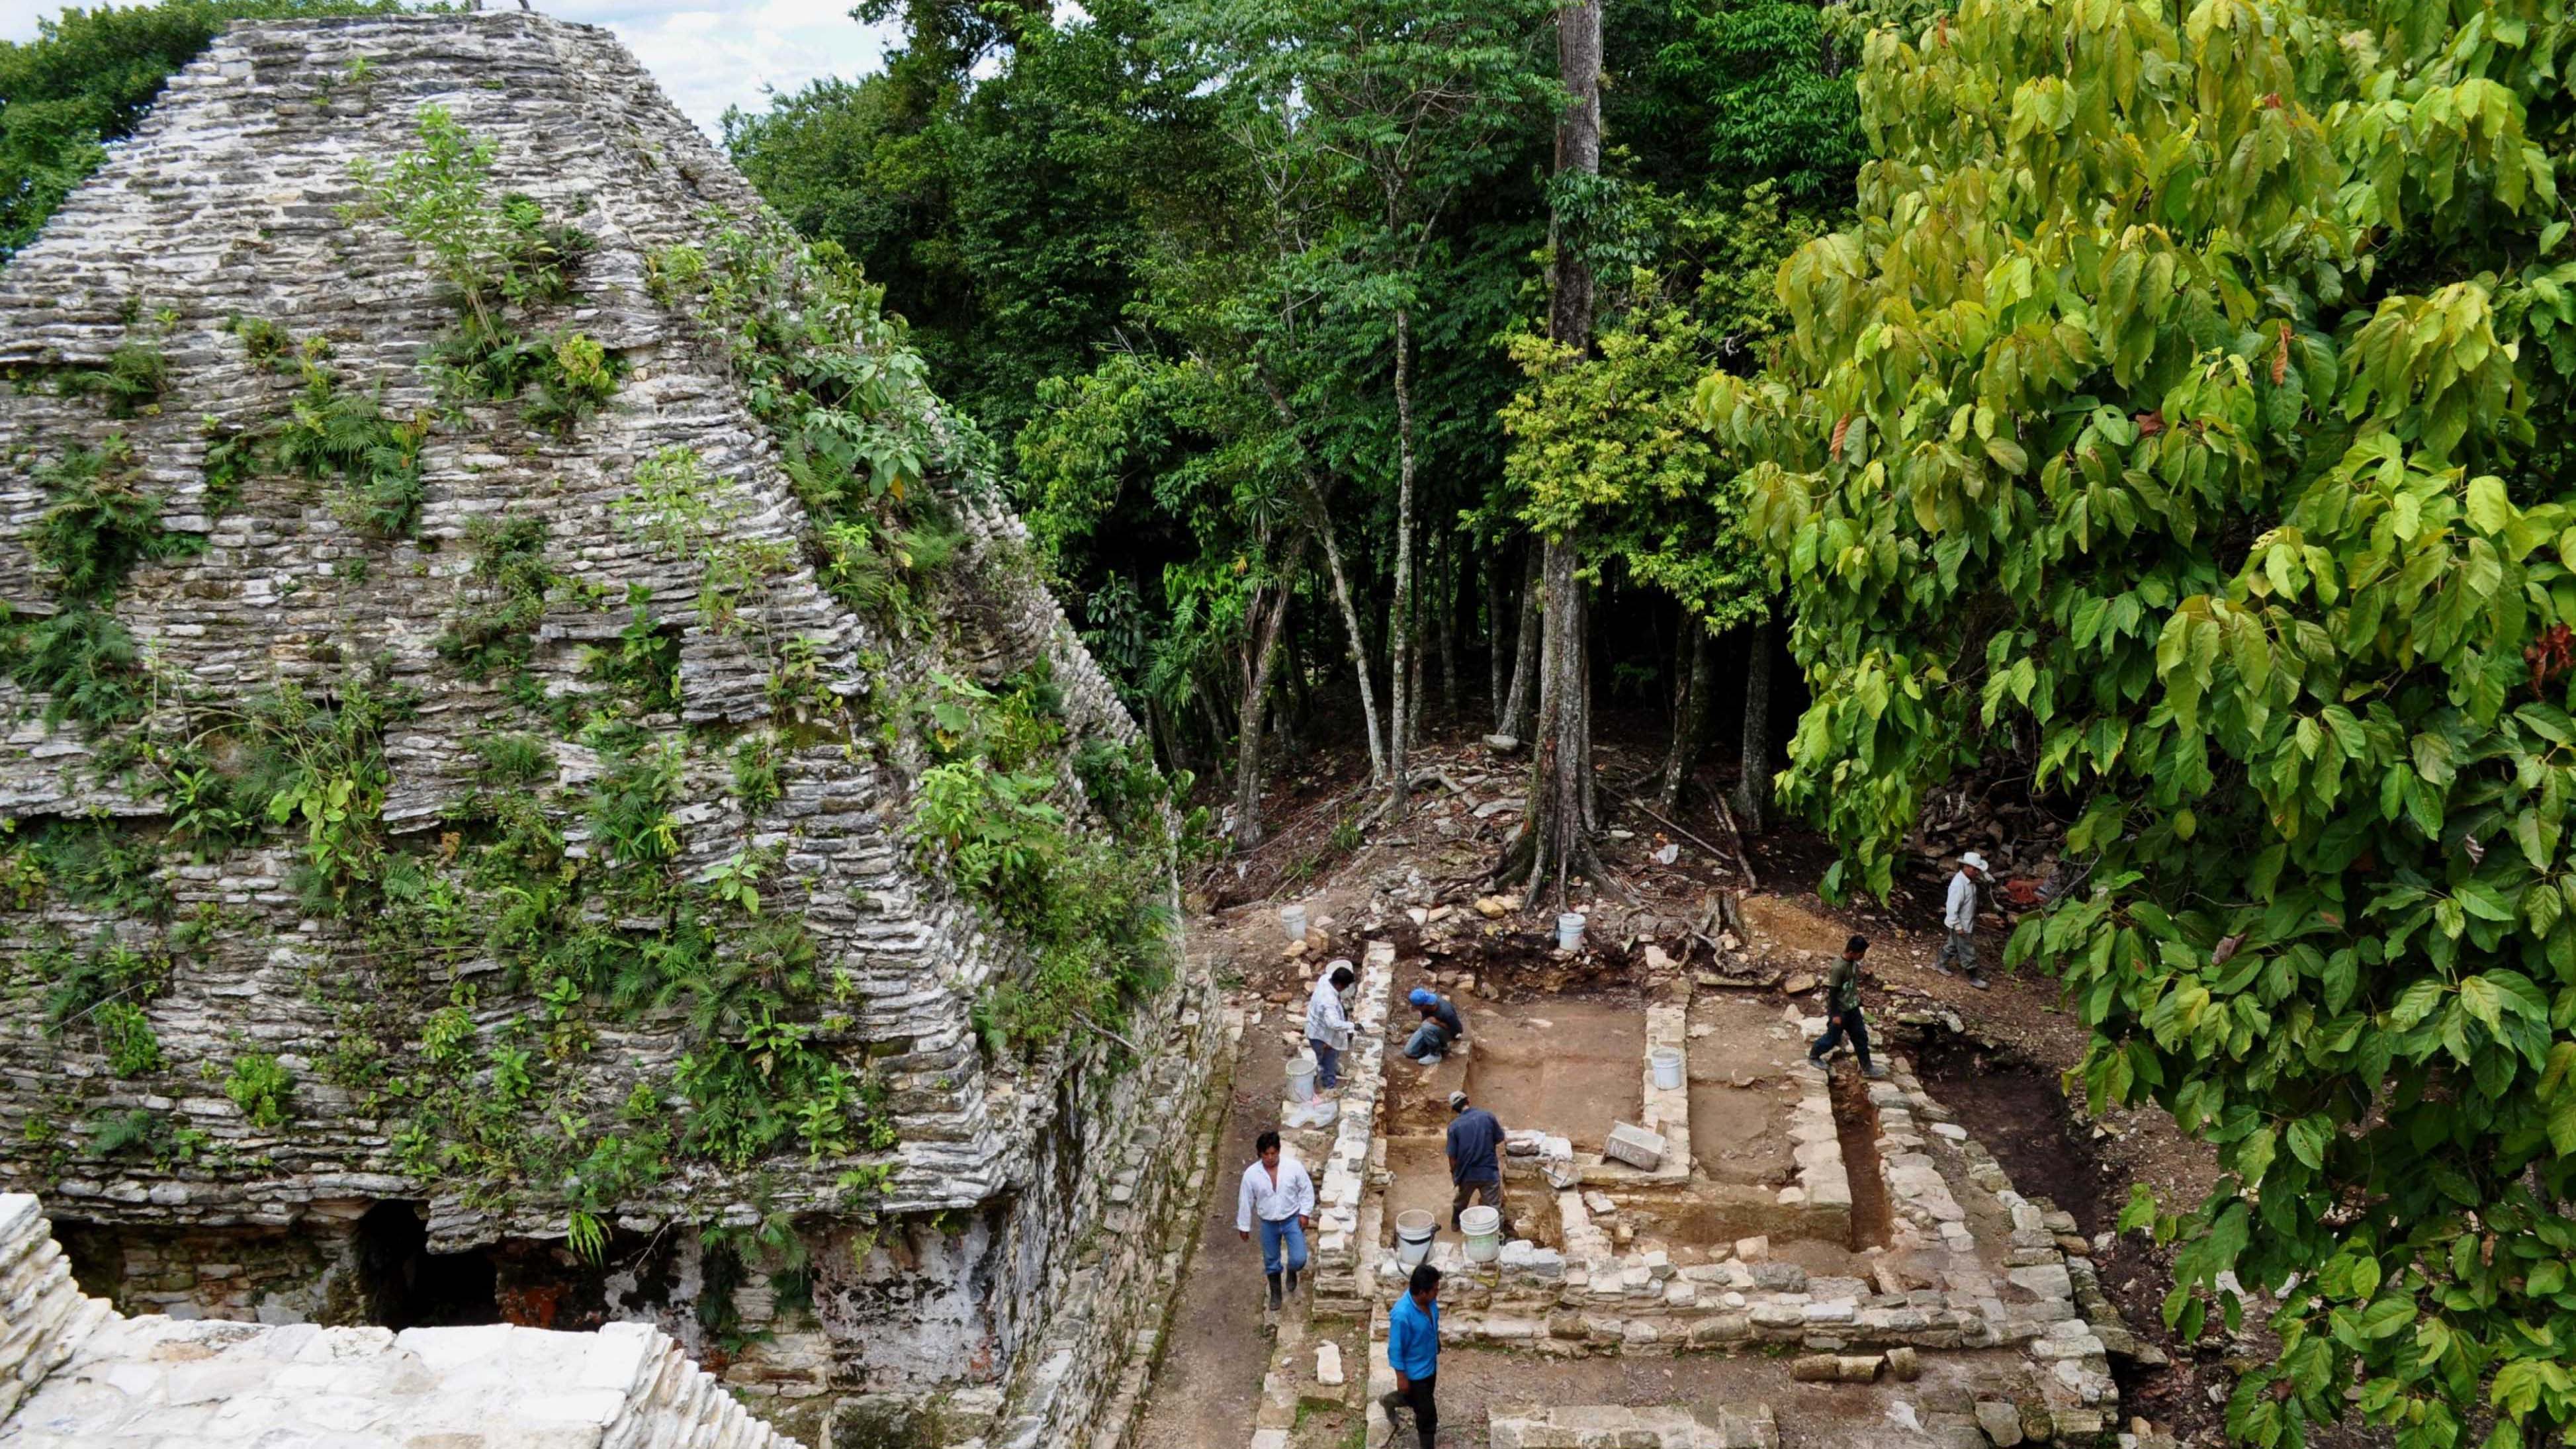 Archaeologists discover 2,000-year-old Mayan palace in Mexico